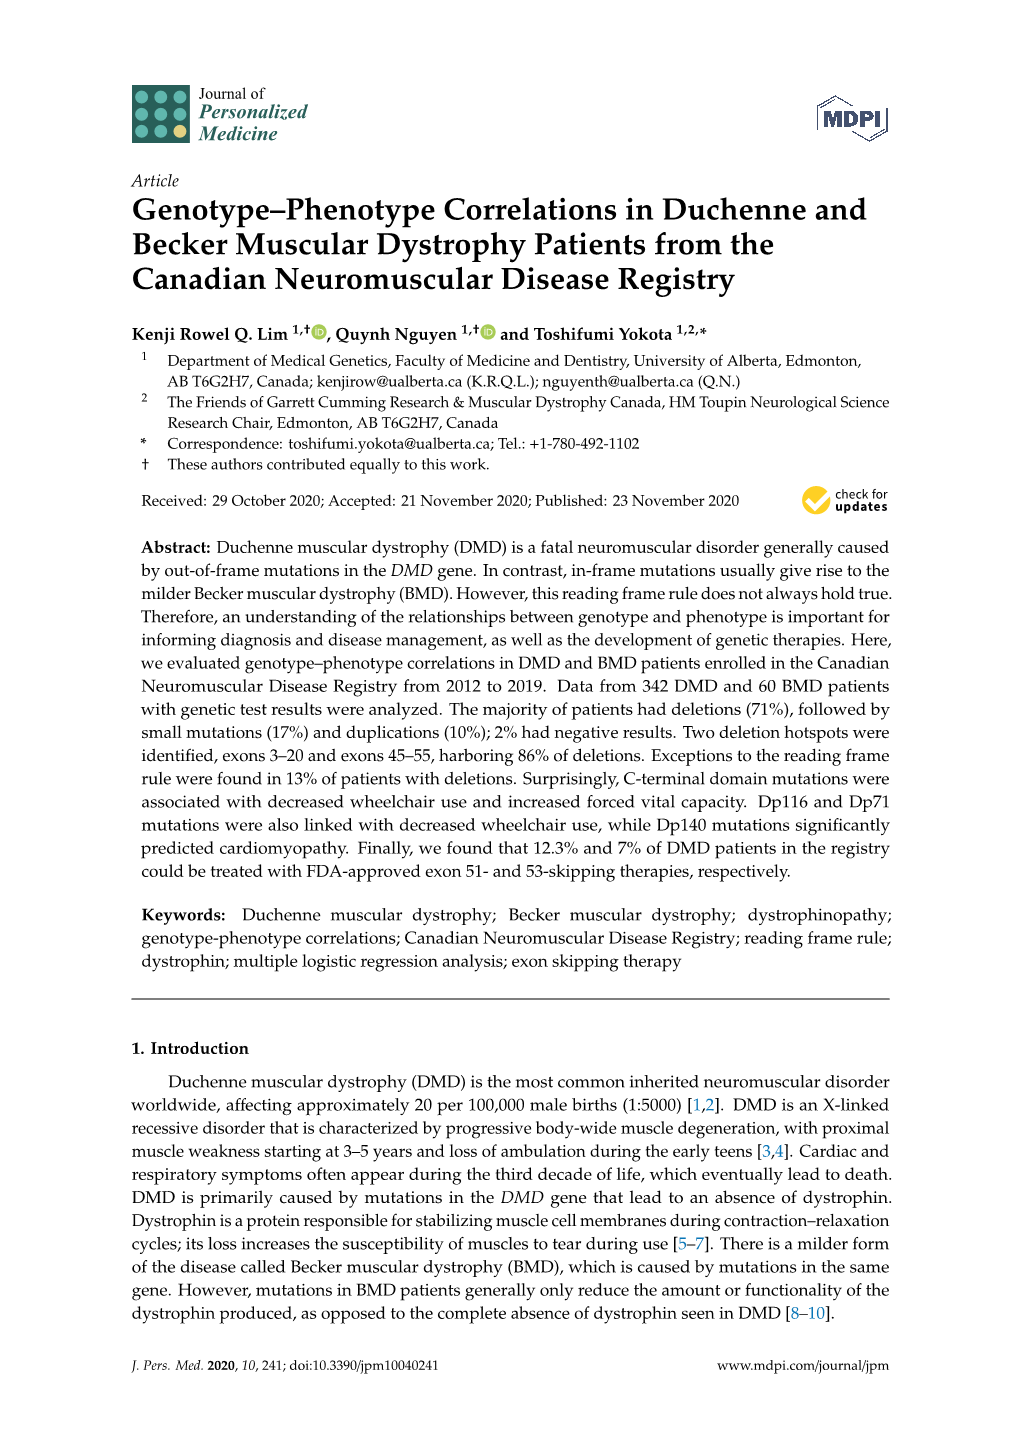 Genotype–Phenotype Correlations in Duchenne and Becker Muscular Dystrophy Patients from the Canadian Neuromuscular Disease Registry